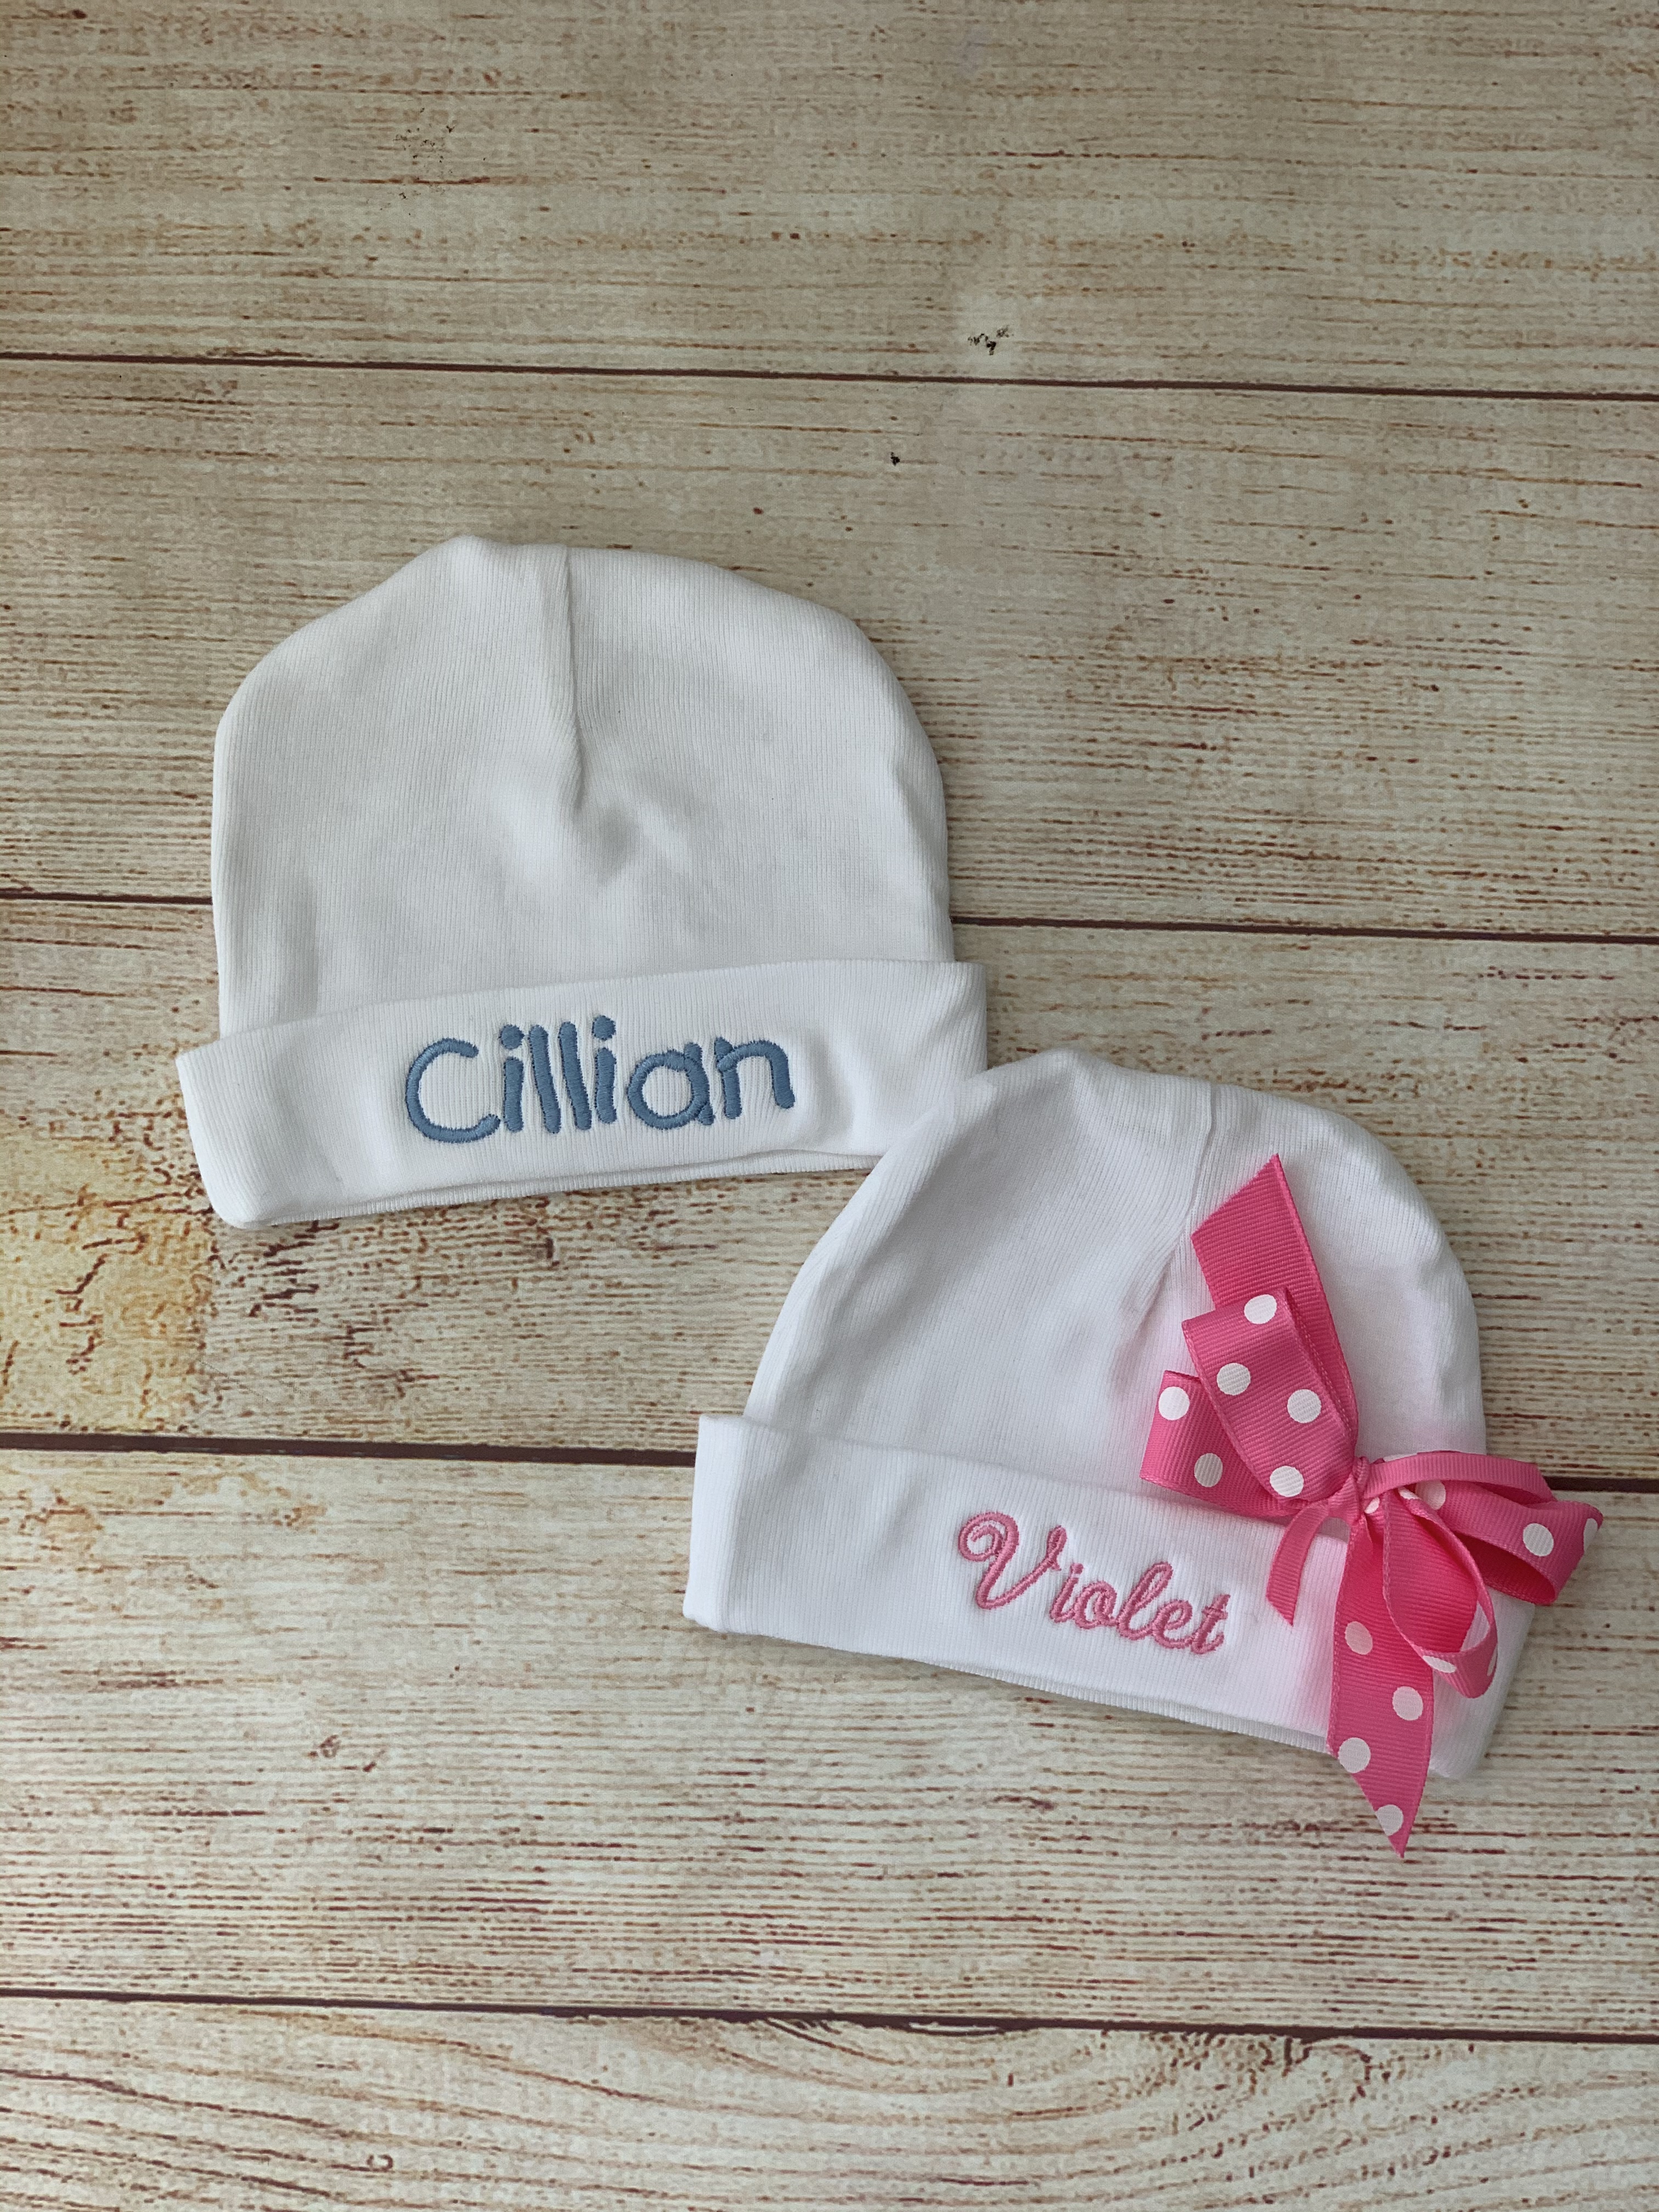 Embroidered baby name hats by Wicked Stitches Gifts.  Cotton jersey infant cap personalized with baby's name.